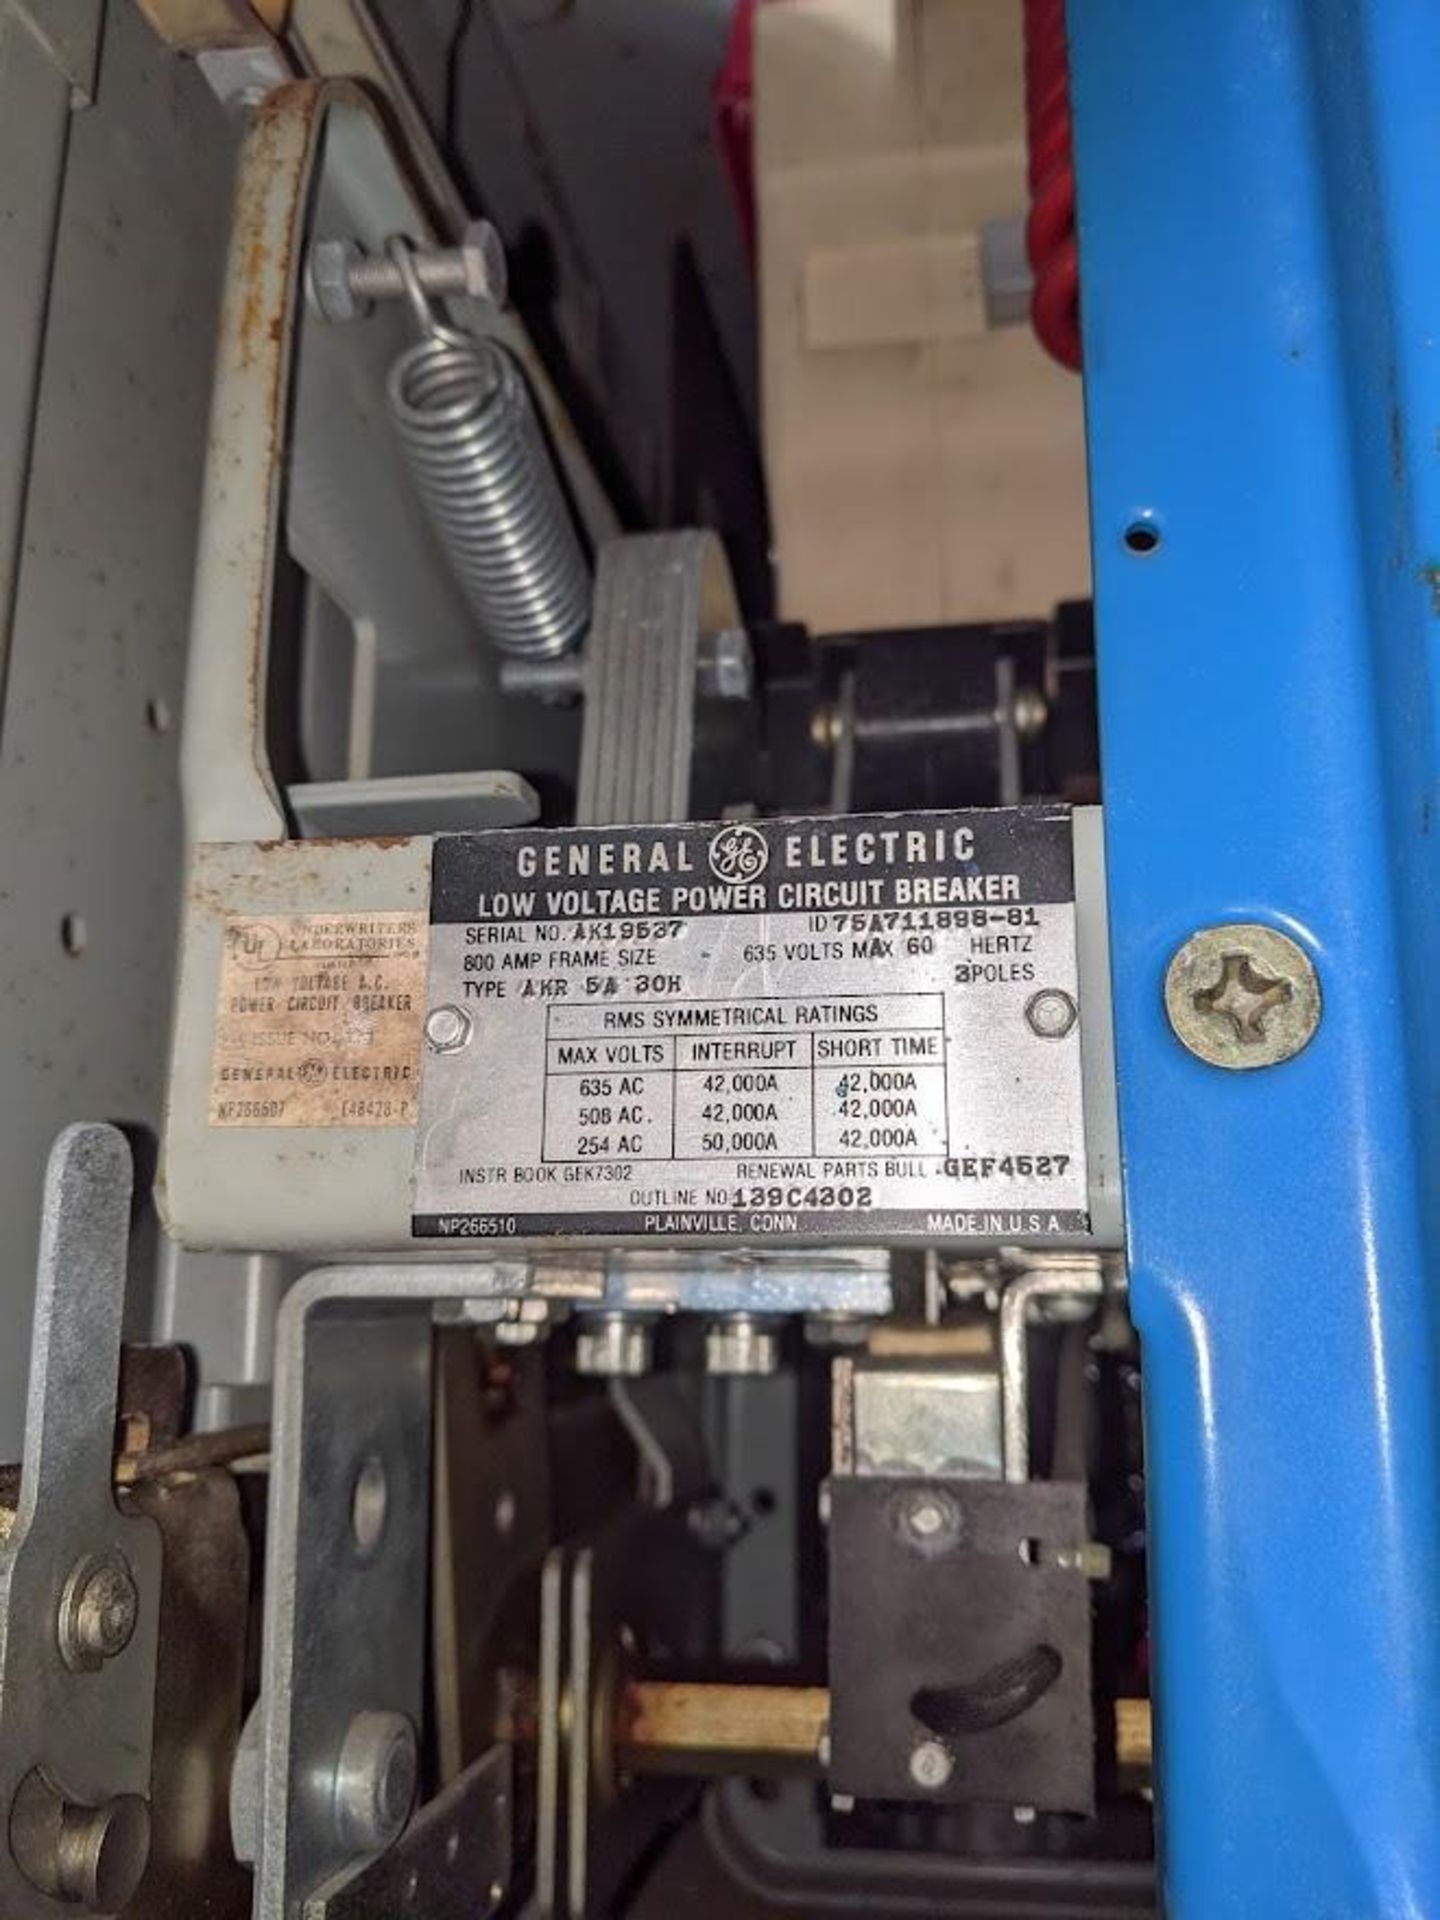 800 AMP GE CIRCUIT BREAKER AKR-5A-30H (NO CABINET), HIT # 3039 - Image 2 of 4